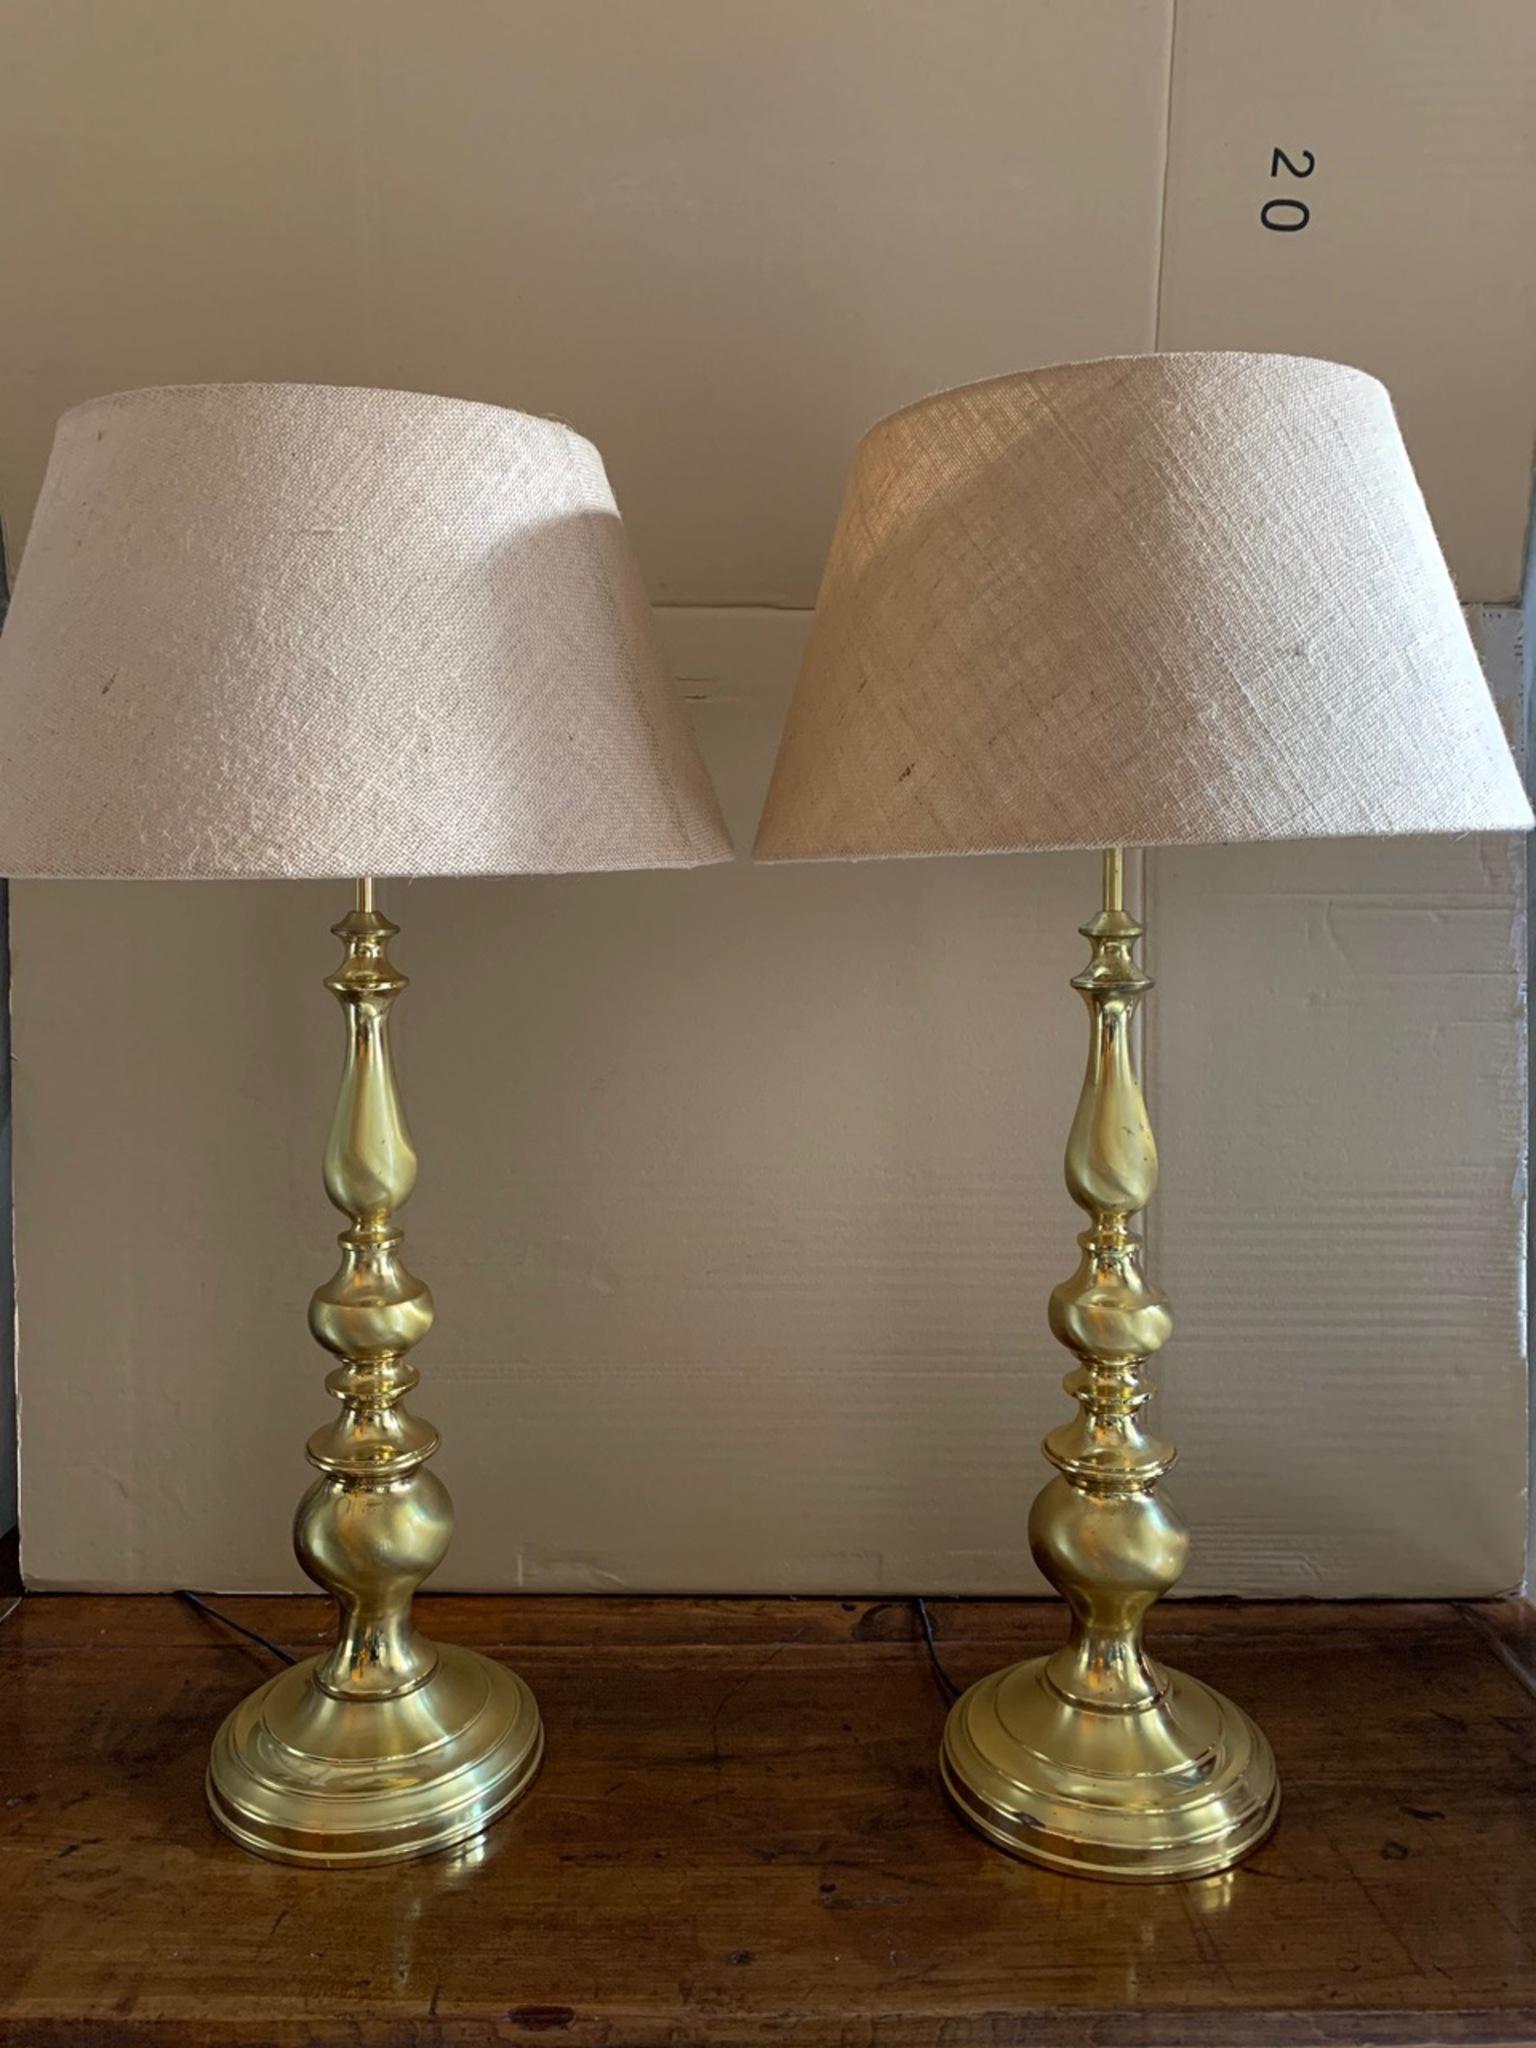 Pair of impressive brass, and polished brass roud globe table lamps, the lamps have been rewired and are in good working order. The lampshades are not include.